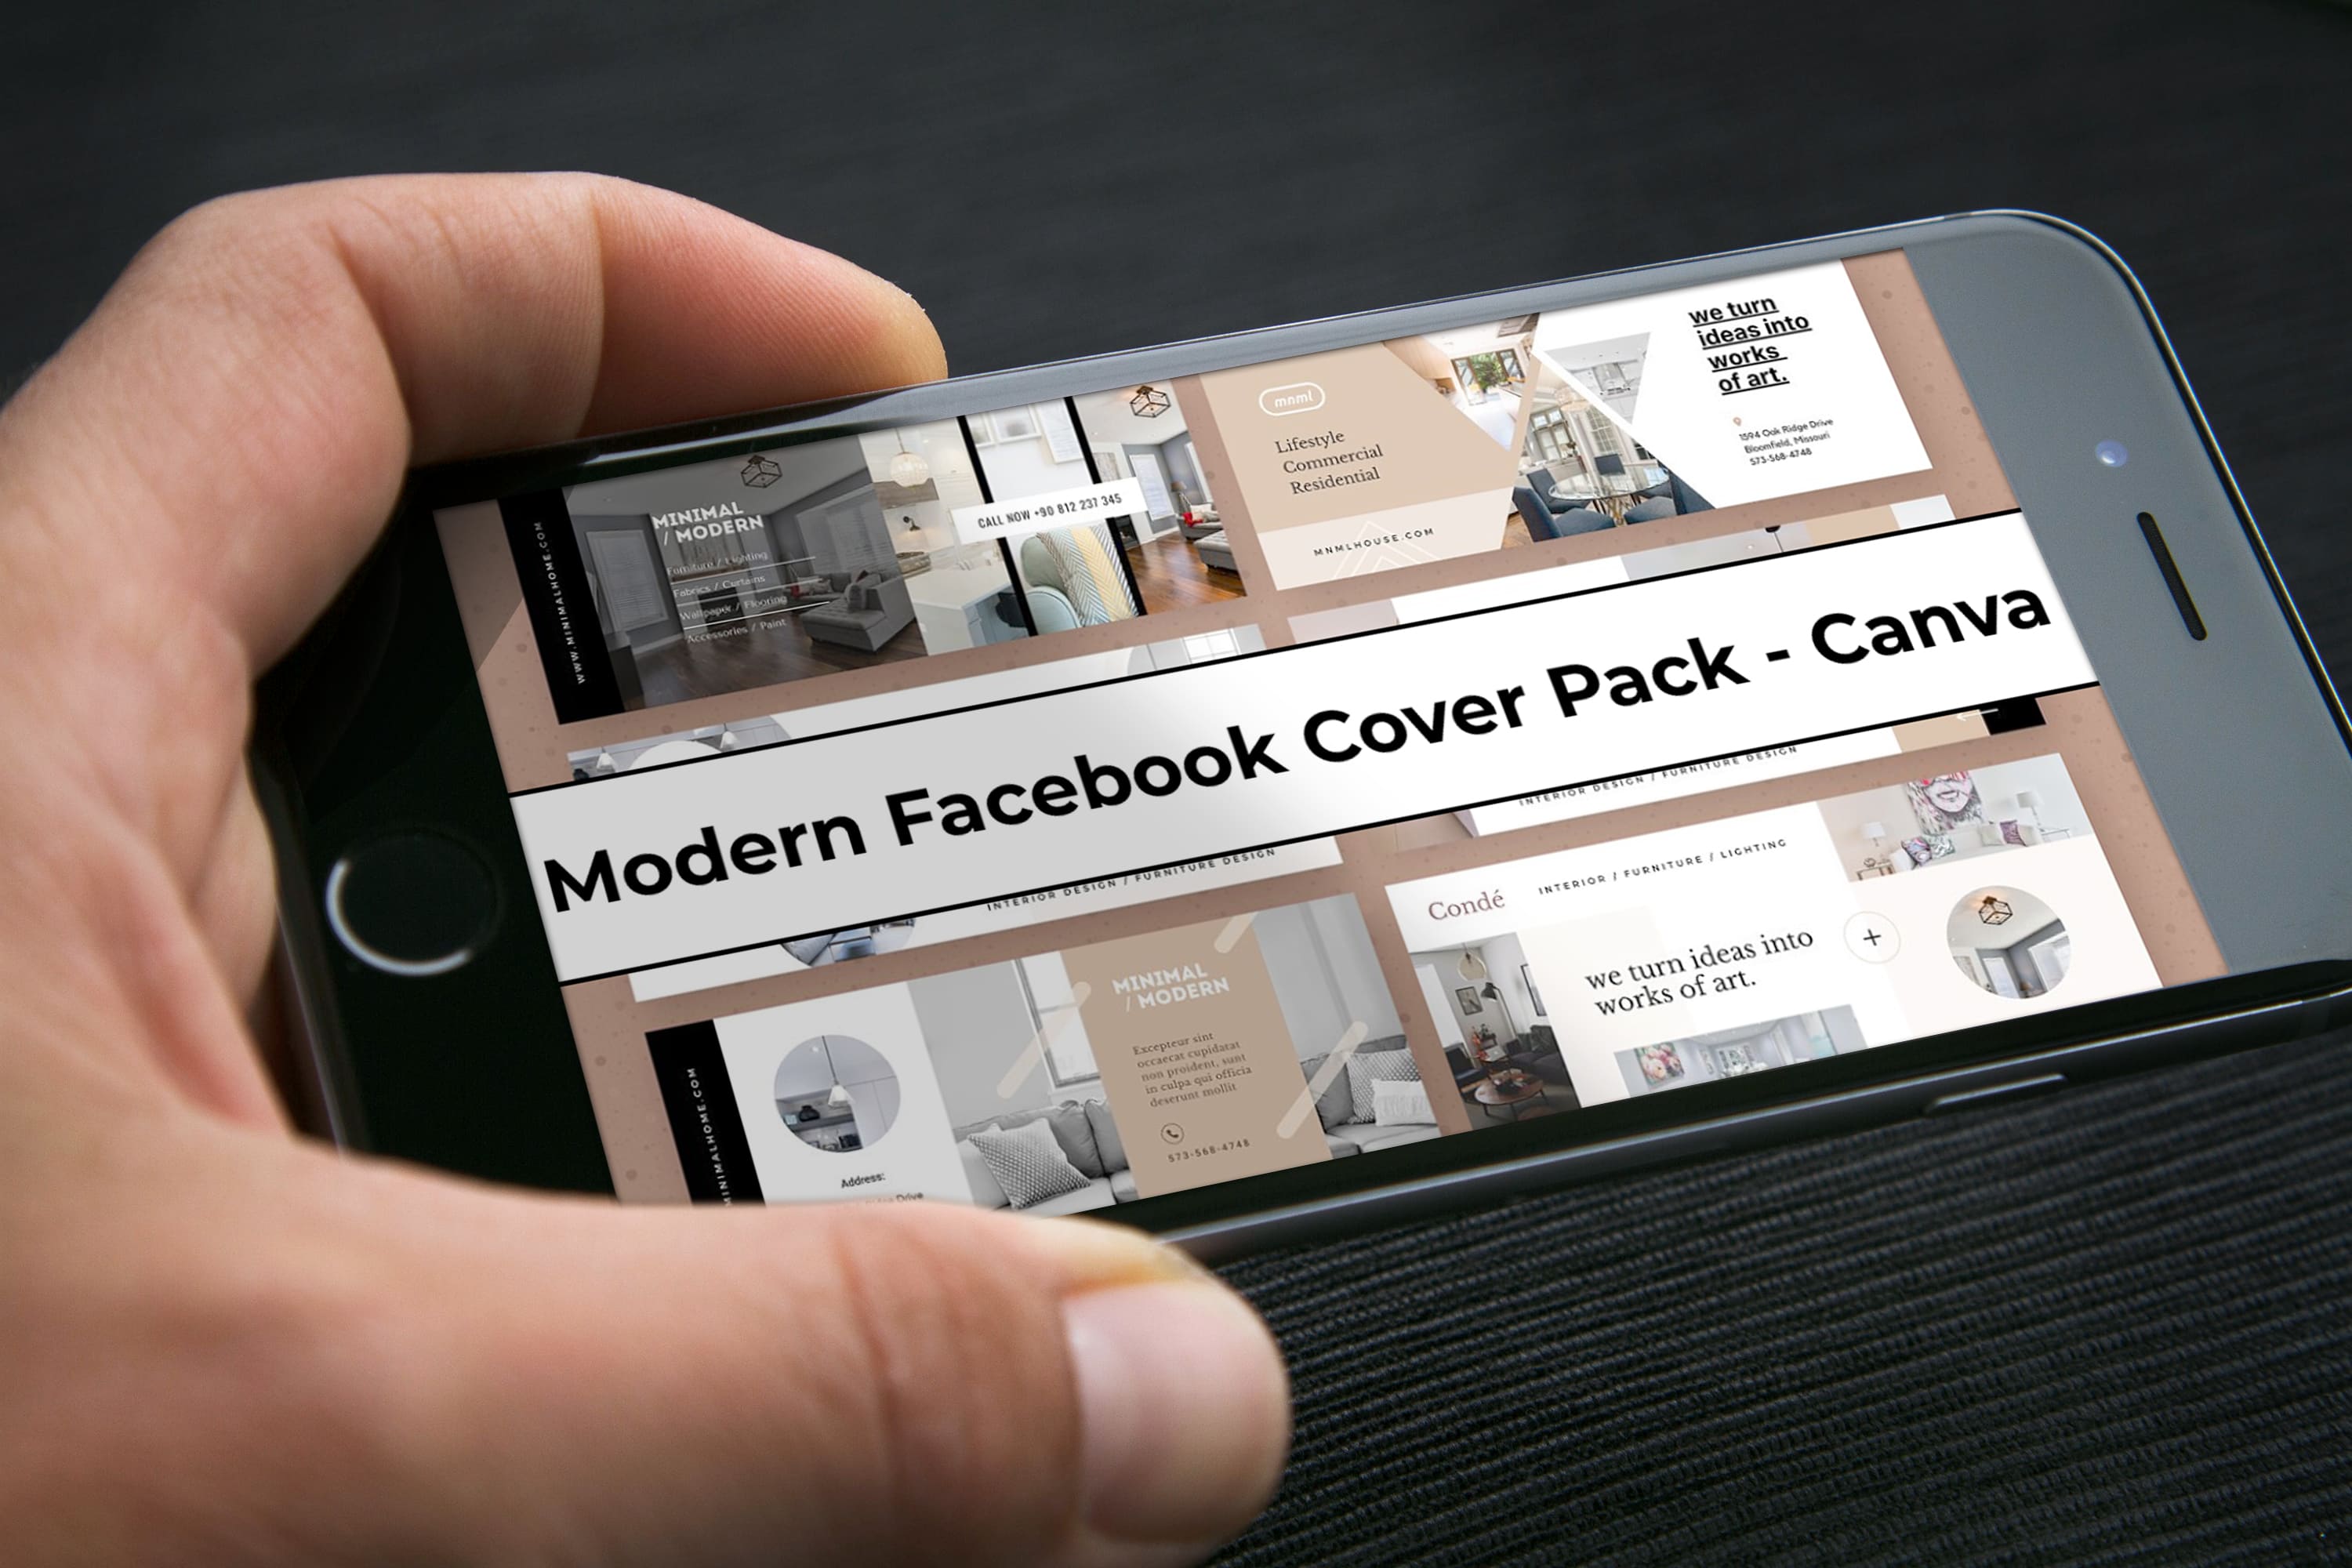 Mobile option of the Modern Facebook Cover Pack - Canva.